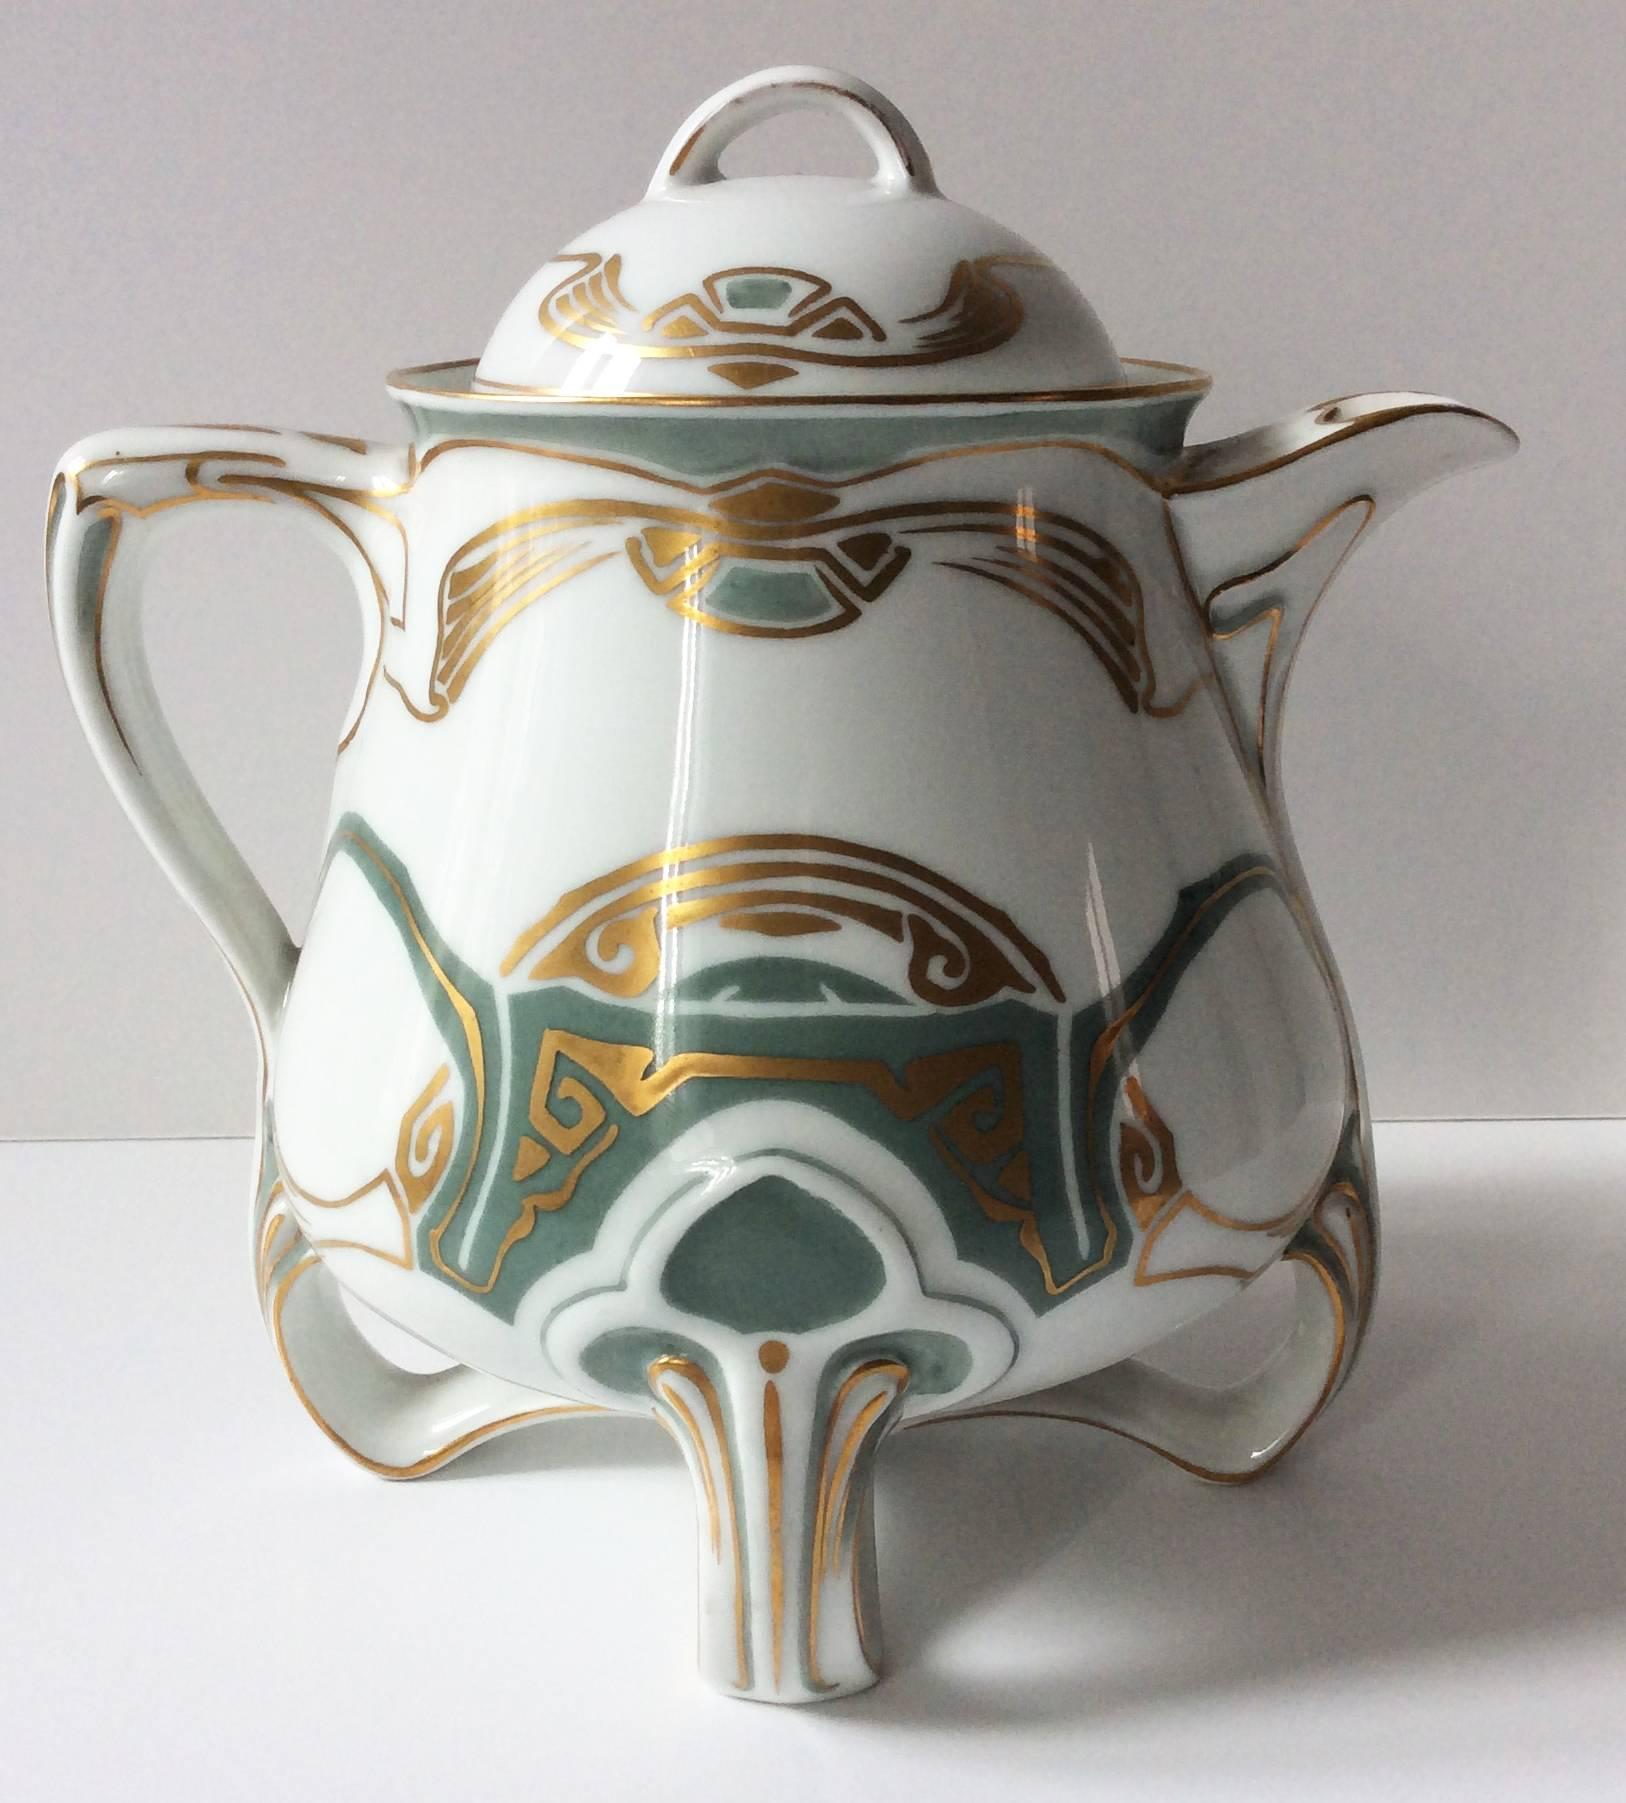 Seven glazed white, green and golden painted porcelain pieces set:
One tea or coffee pot with lid (dimensions: H 7in, depth 7.8in, width 5.8in).
One creamer (H 5.5in, depth 5.2in, width 4in).
One sugar pot with lid (H 4.7in, Diam 5.5in).
Two tea